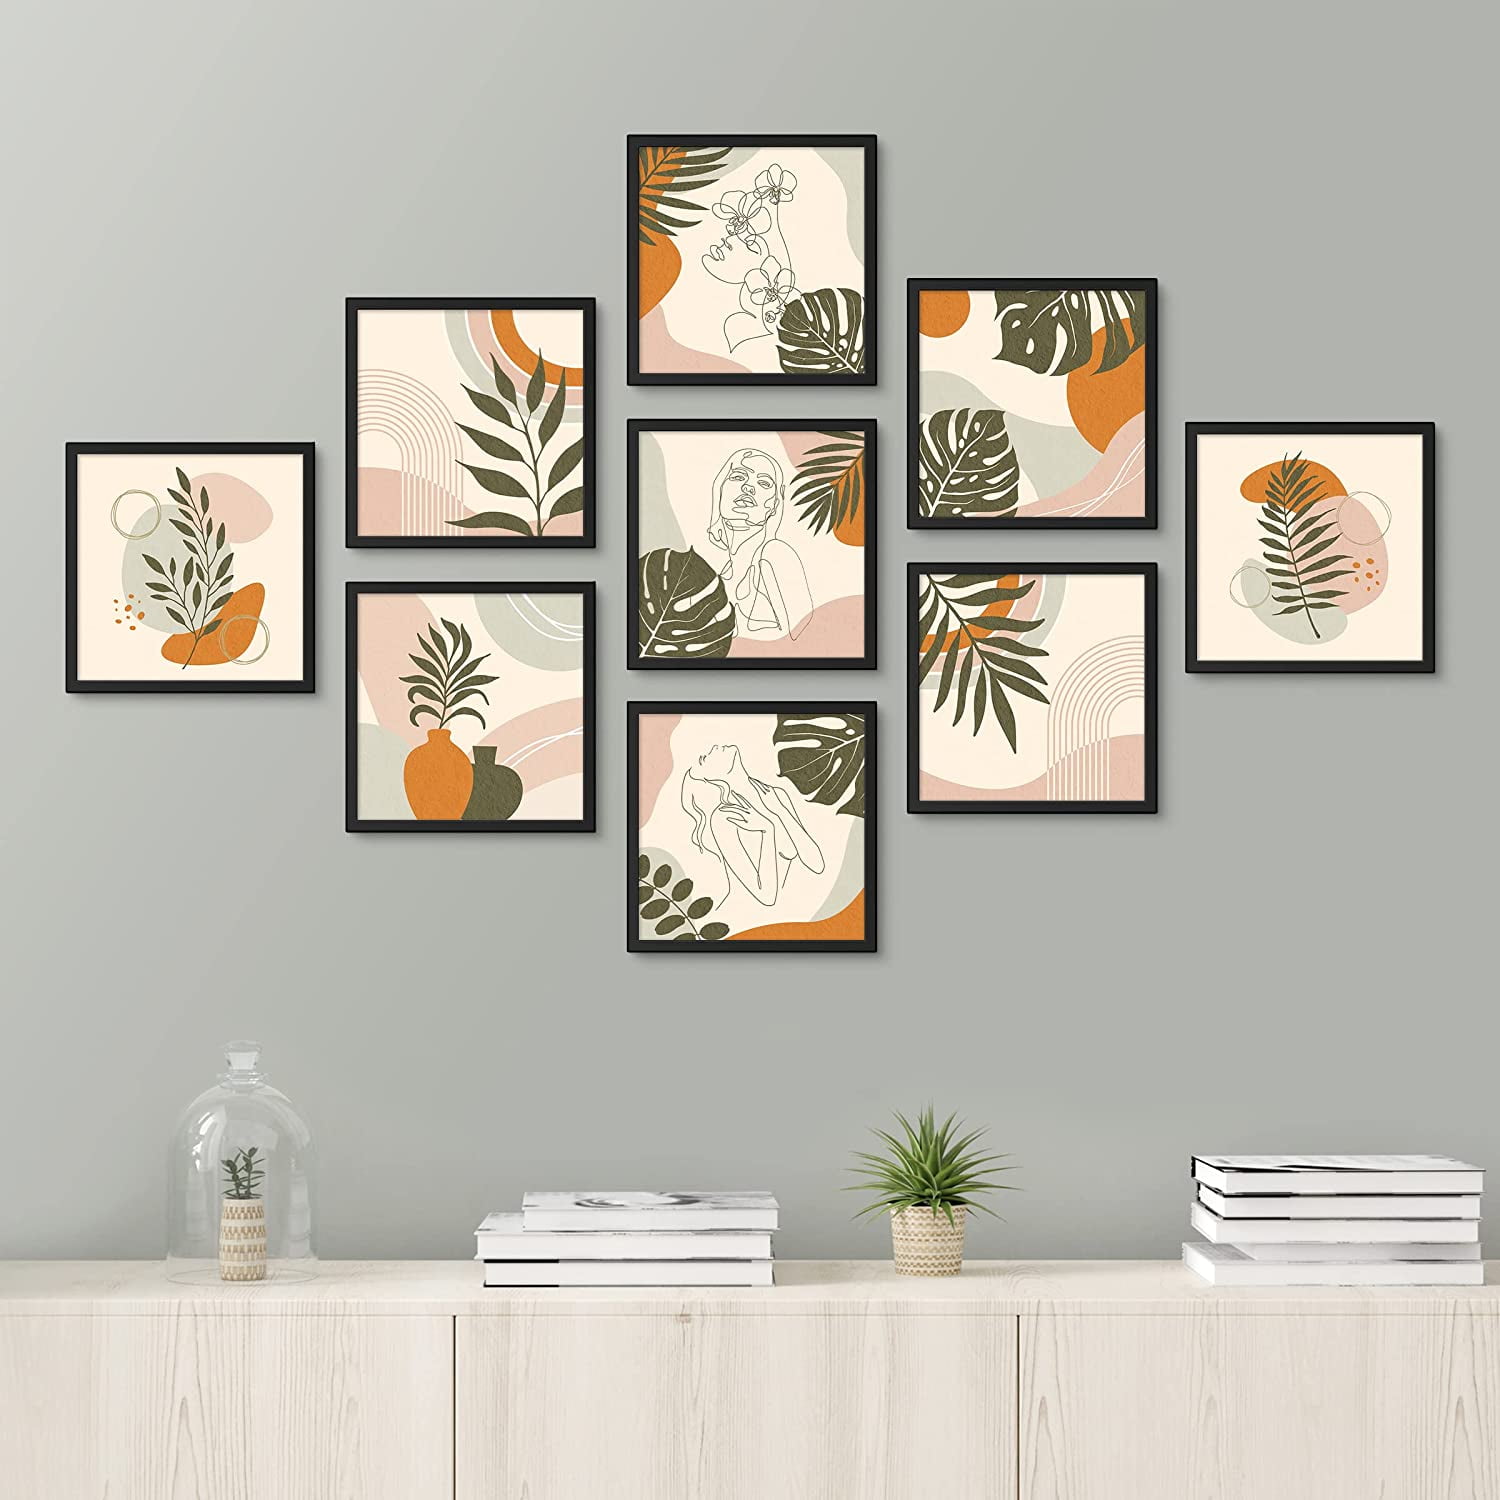 Wall Decor Ideas - Make contemporary wall art from a collage of carefully  curated items